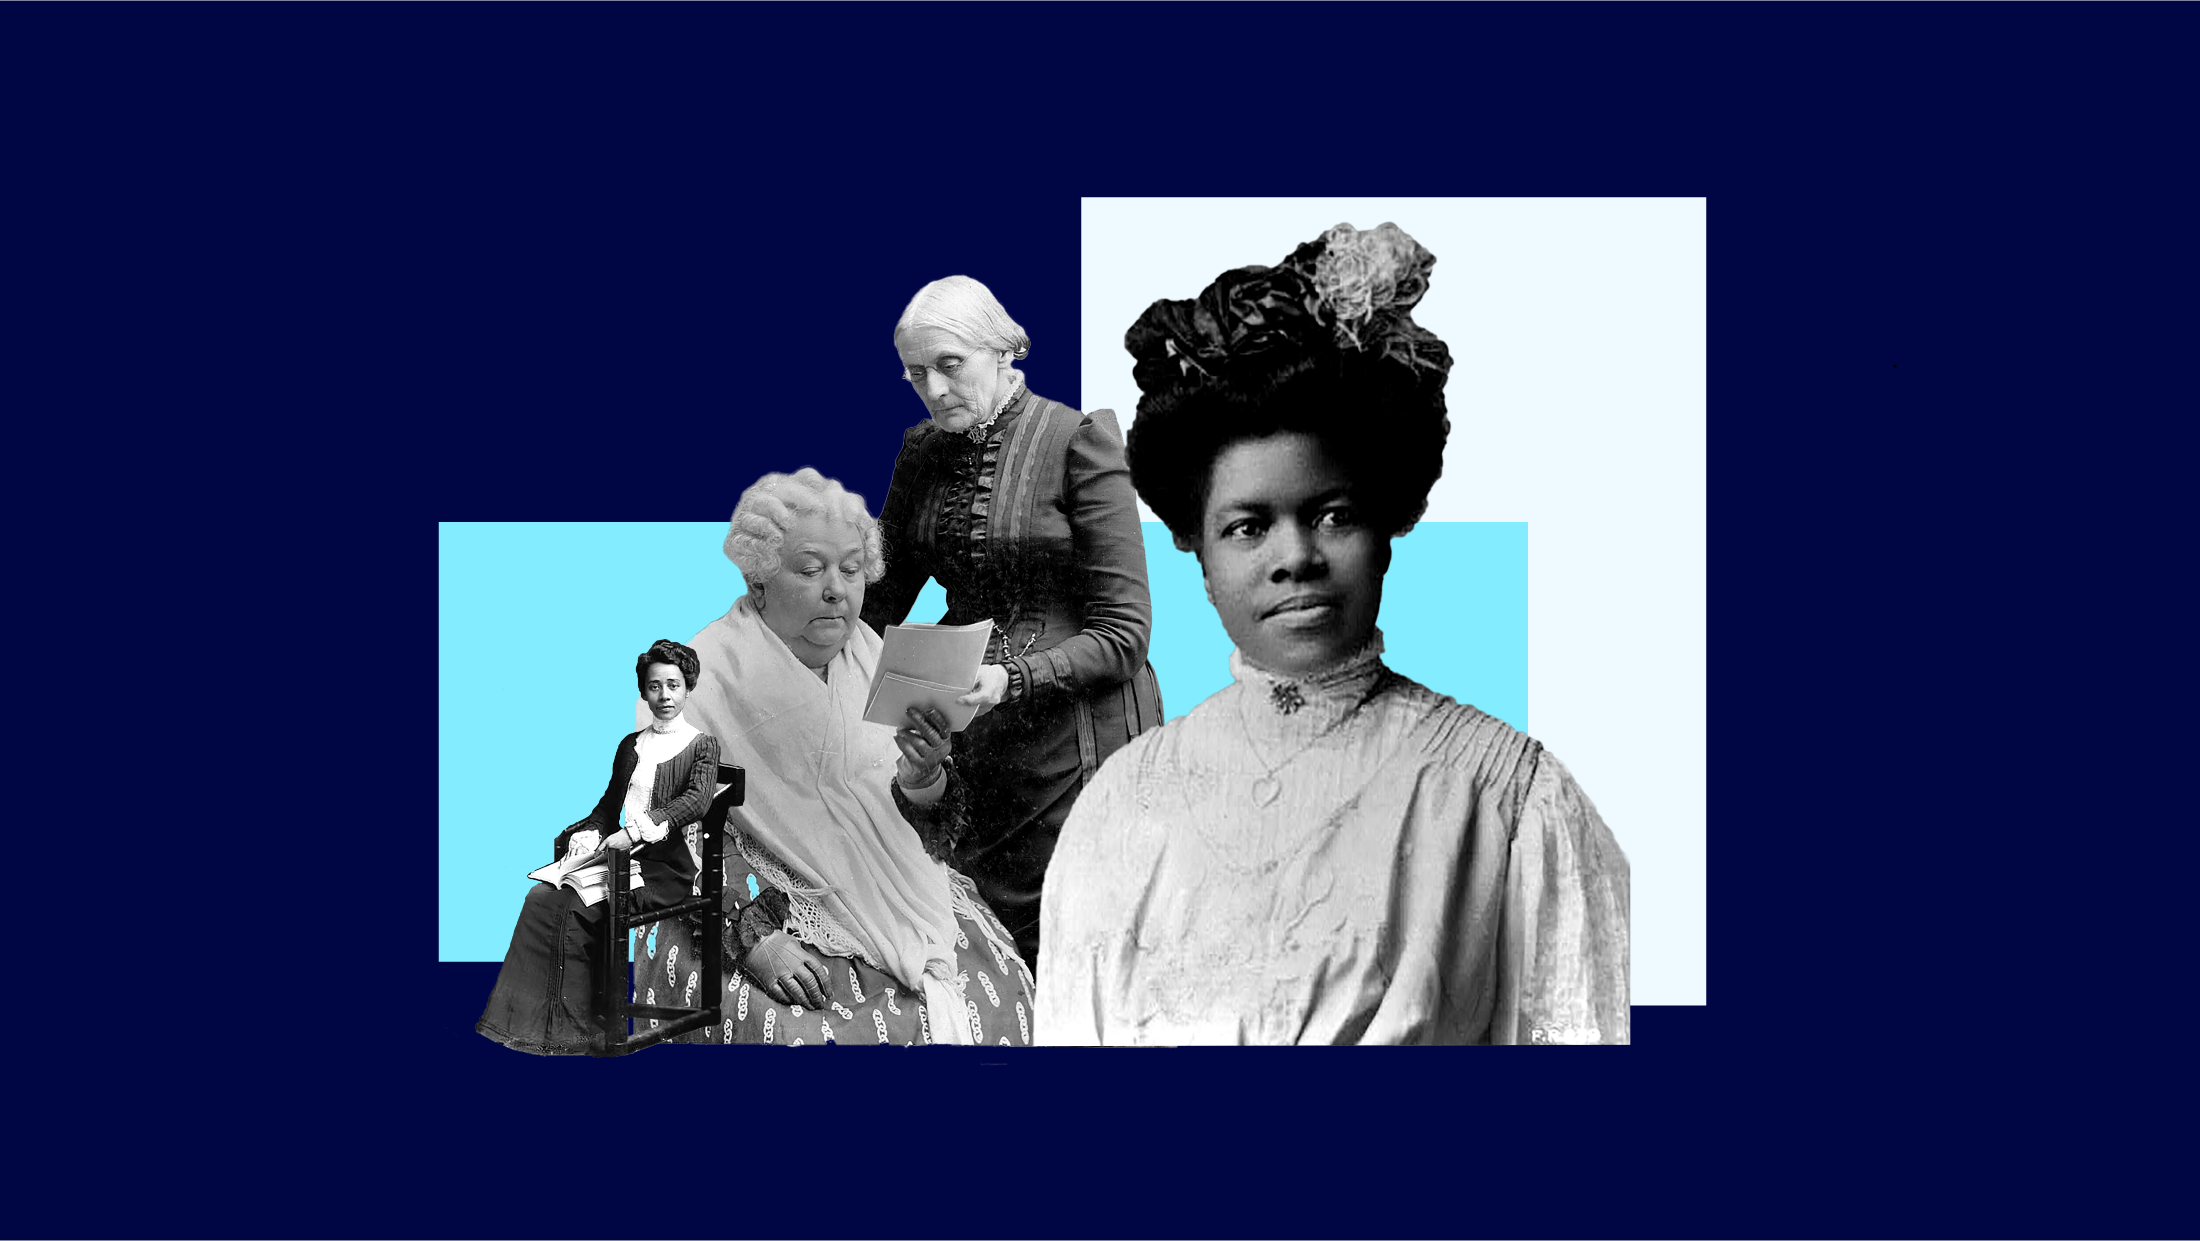 The Political Power of Women of Color - Gender on the Ballot